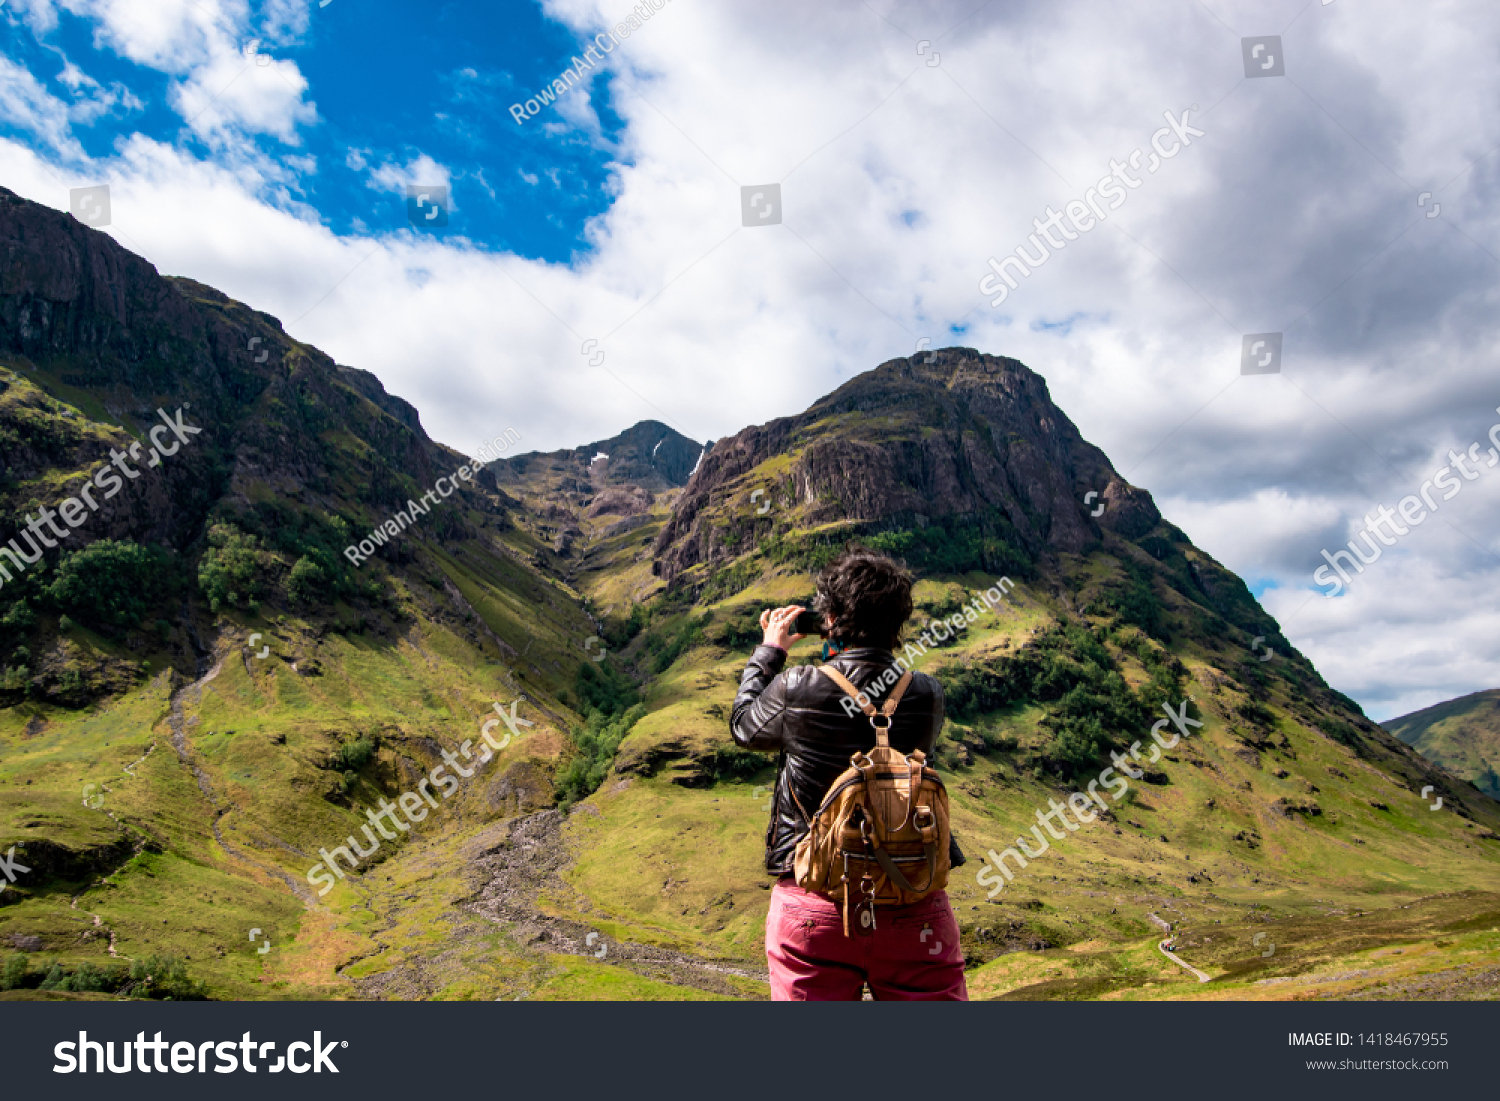 Panoramic view of the Three Sisters in Glencoe with a tourist. Scotland, UK. #1418467955